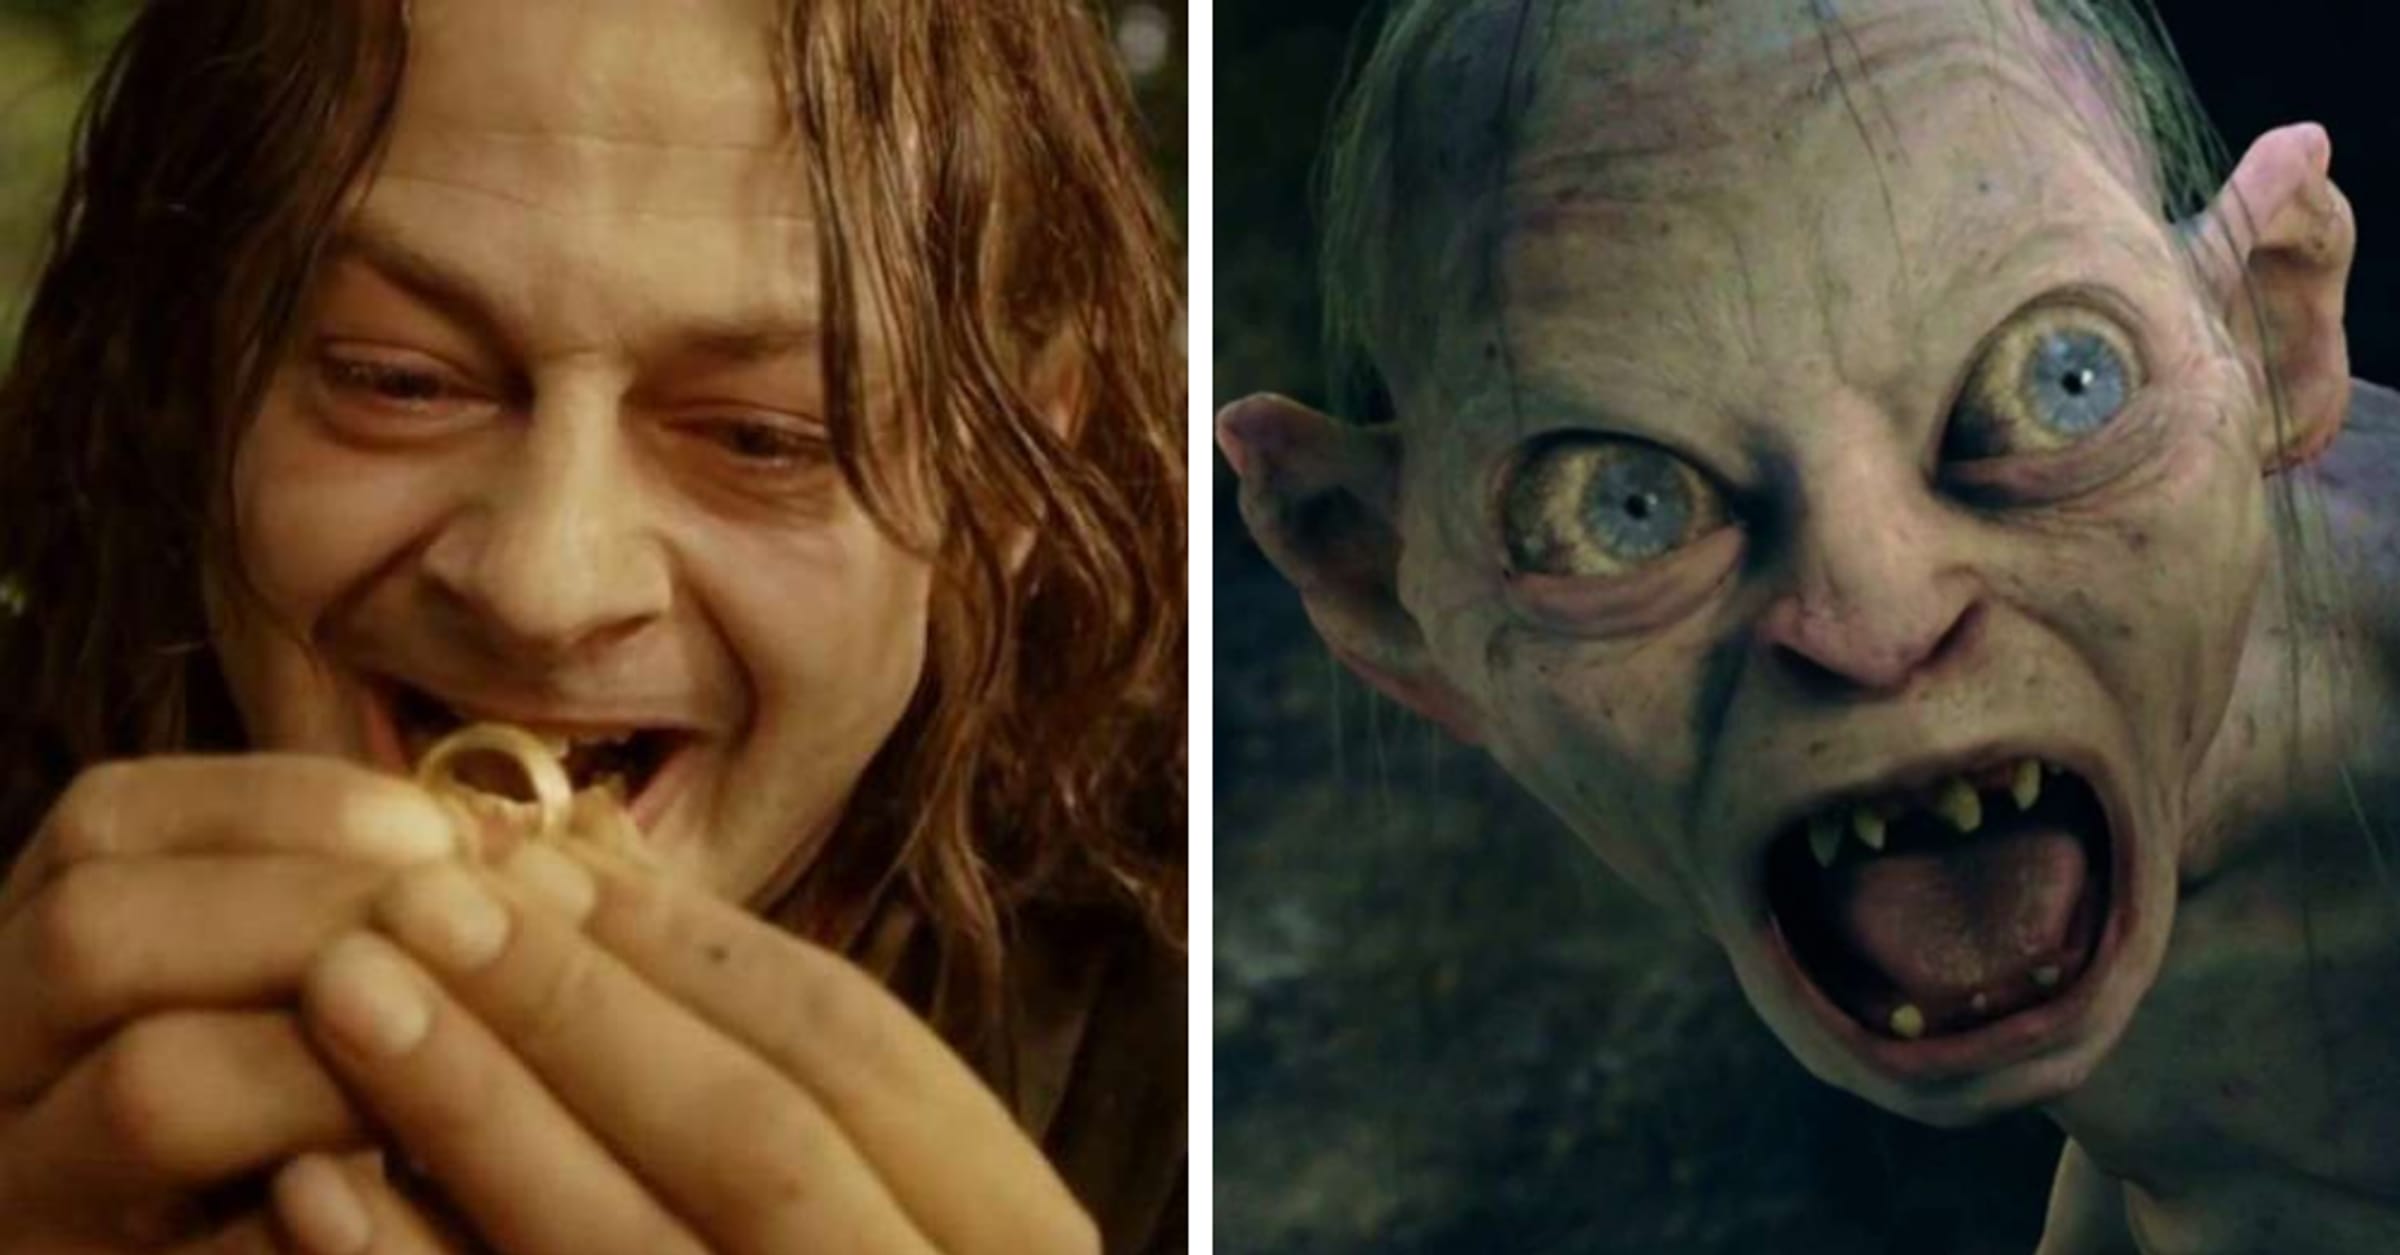 What Type of Hobbit Is Gollum in Lord of the Rings?